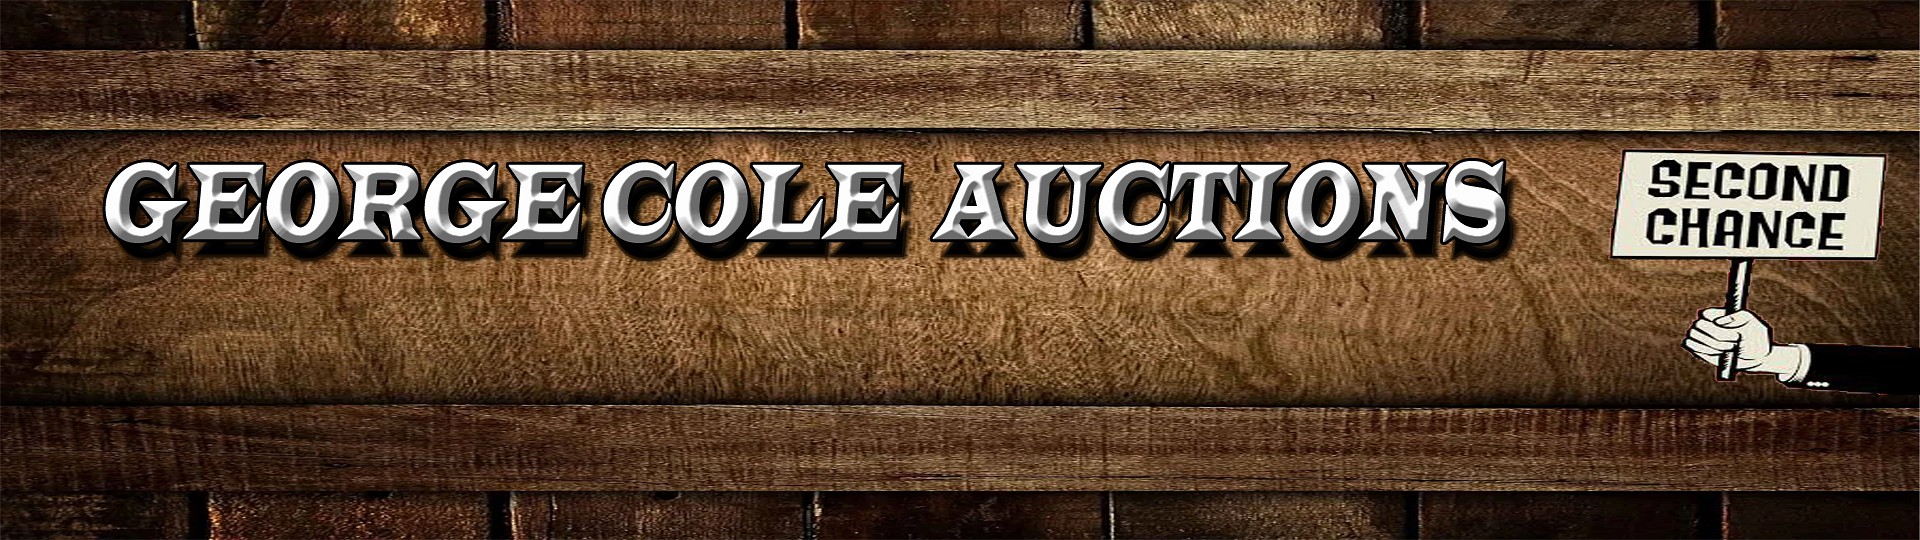 10/18 - 11/1 ESTATE AUCTION MERCHANDISE 2ND CHANCE SALE by George Cole Auctions & Realty